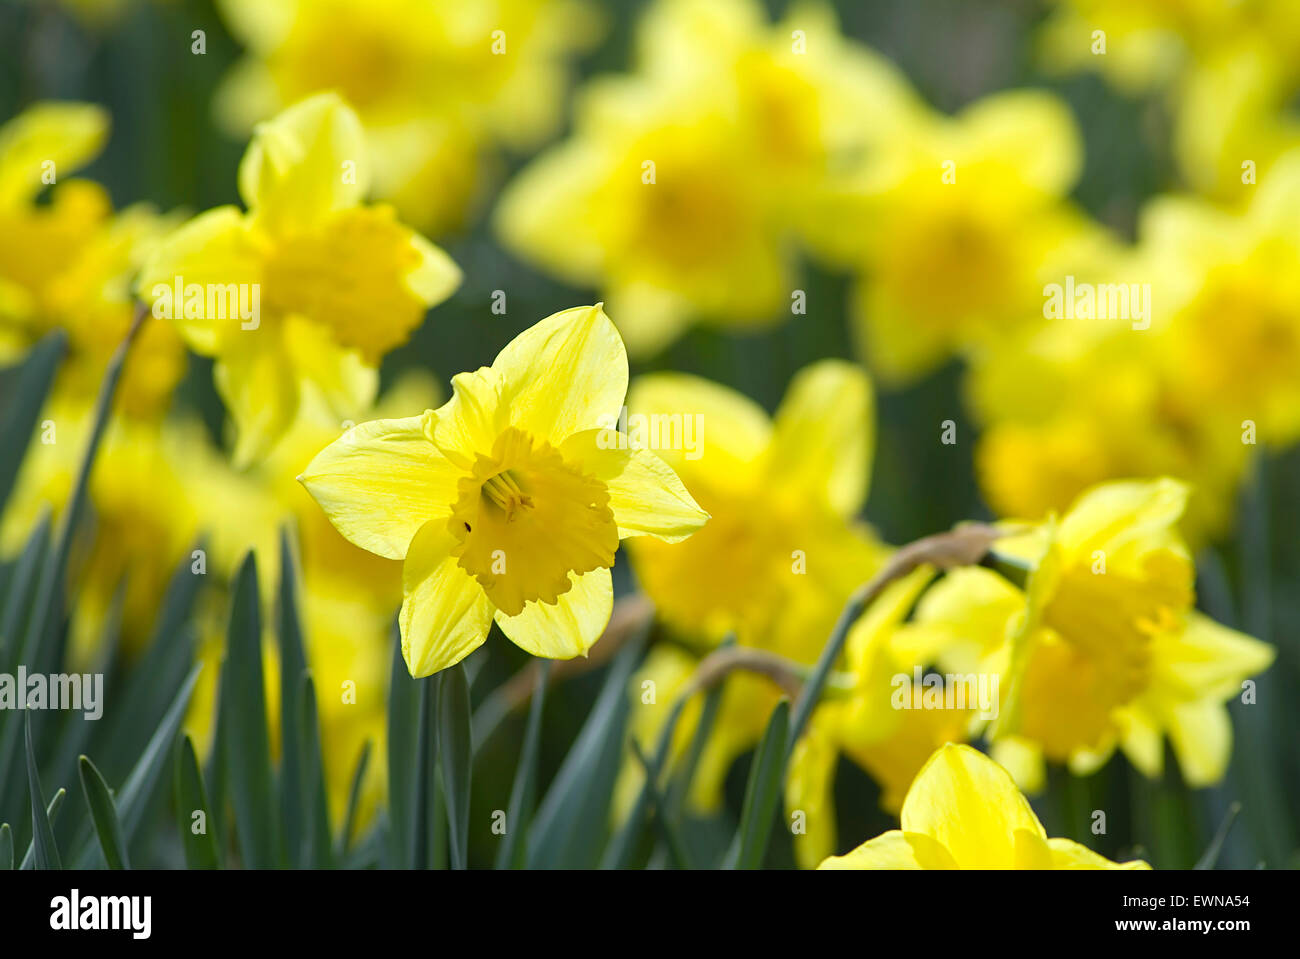 Bunch of daffodils, narcissi (Narcissus) in a park Stock Photo